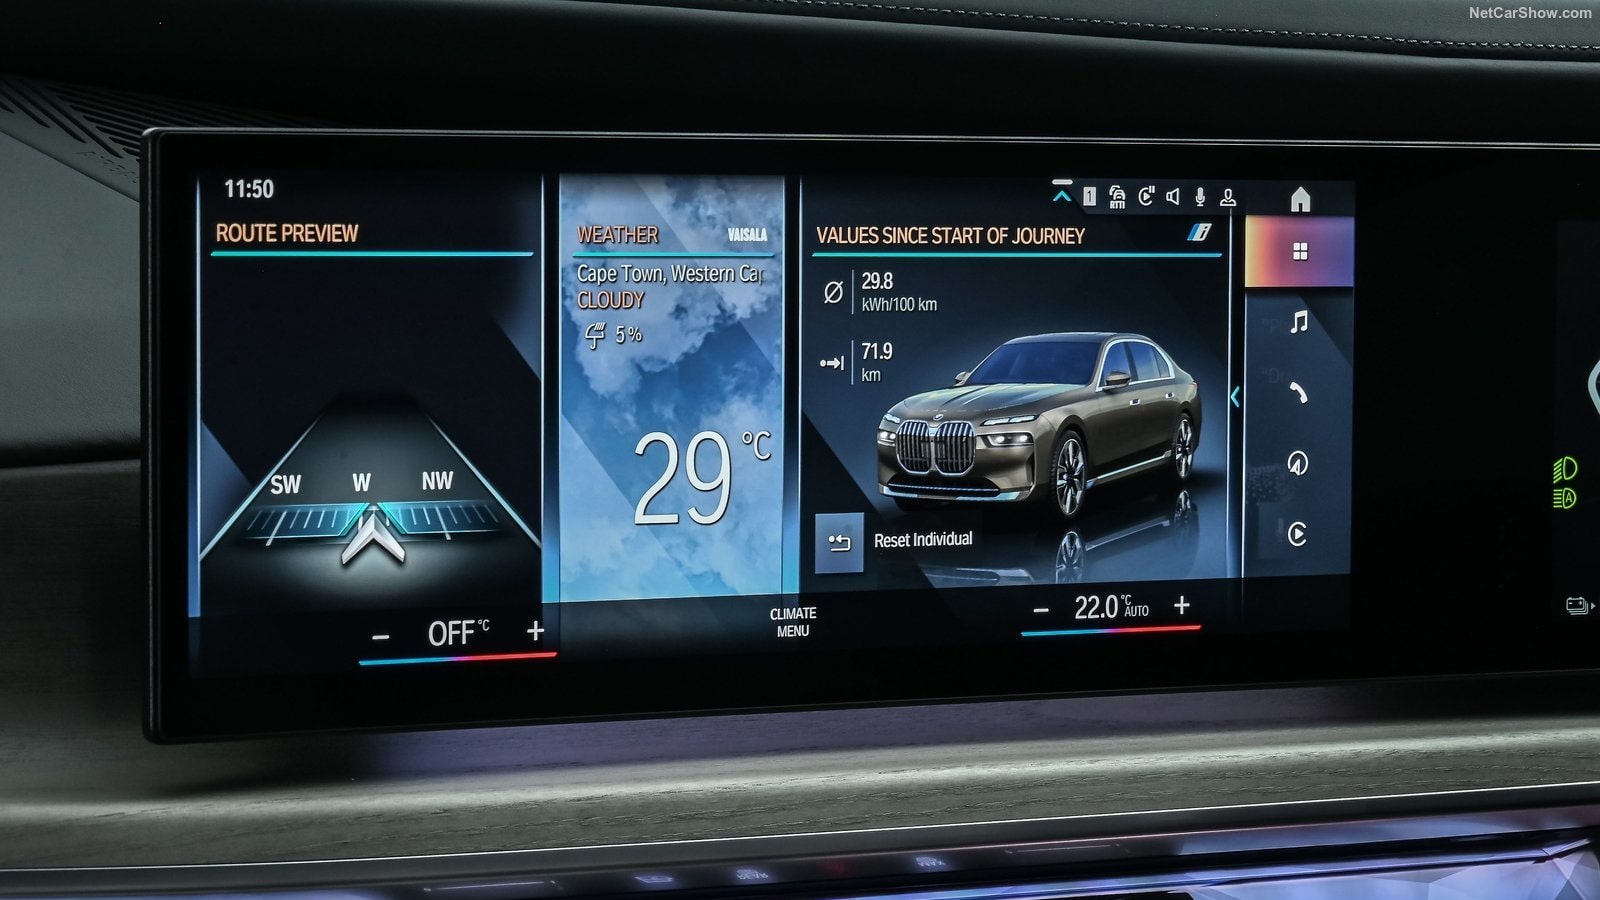 BMW i7 central media console showing route preview, the weather and vehicle values.